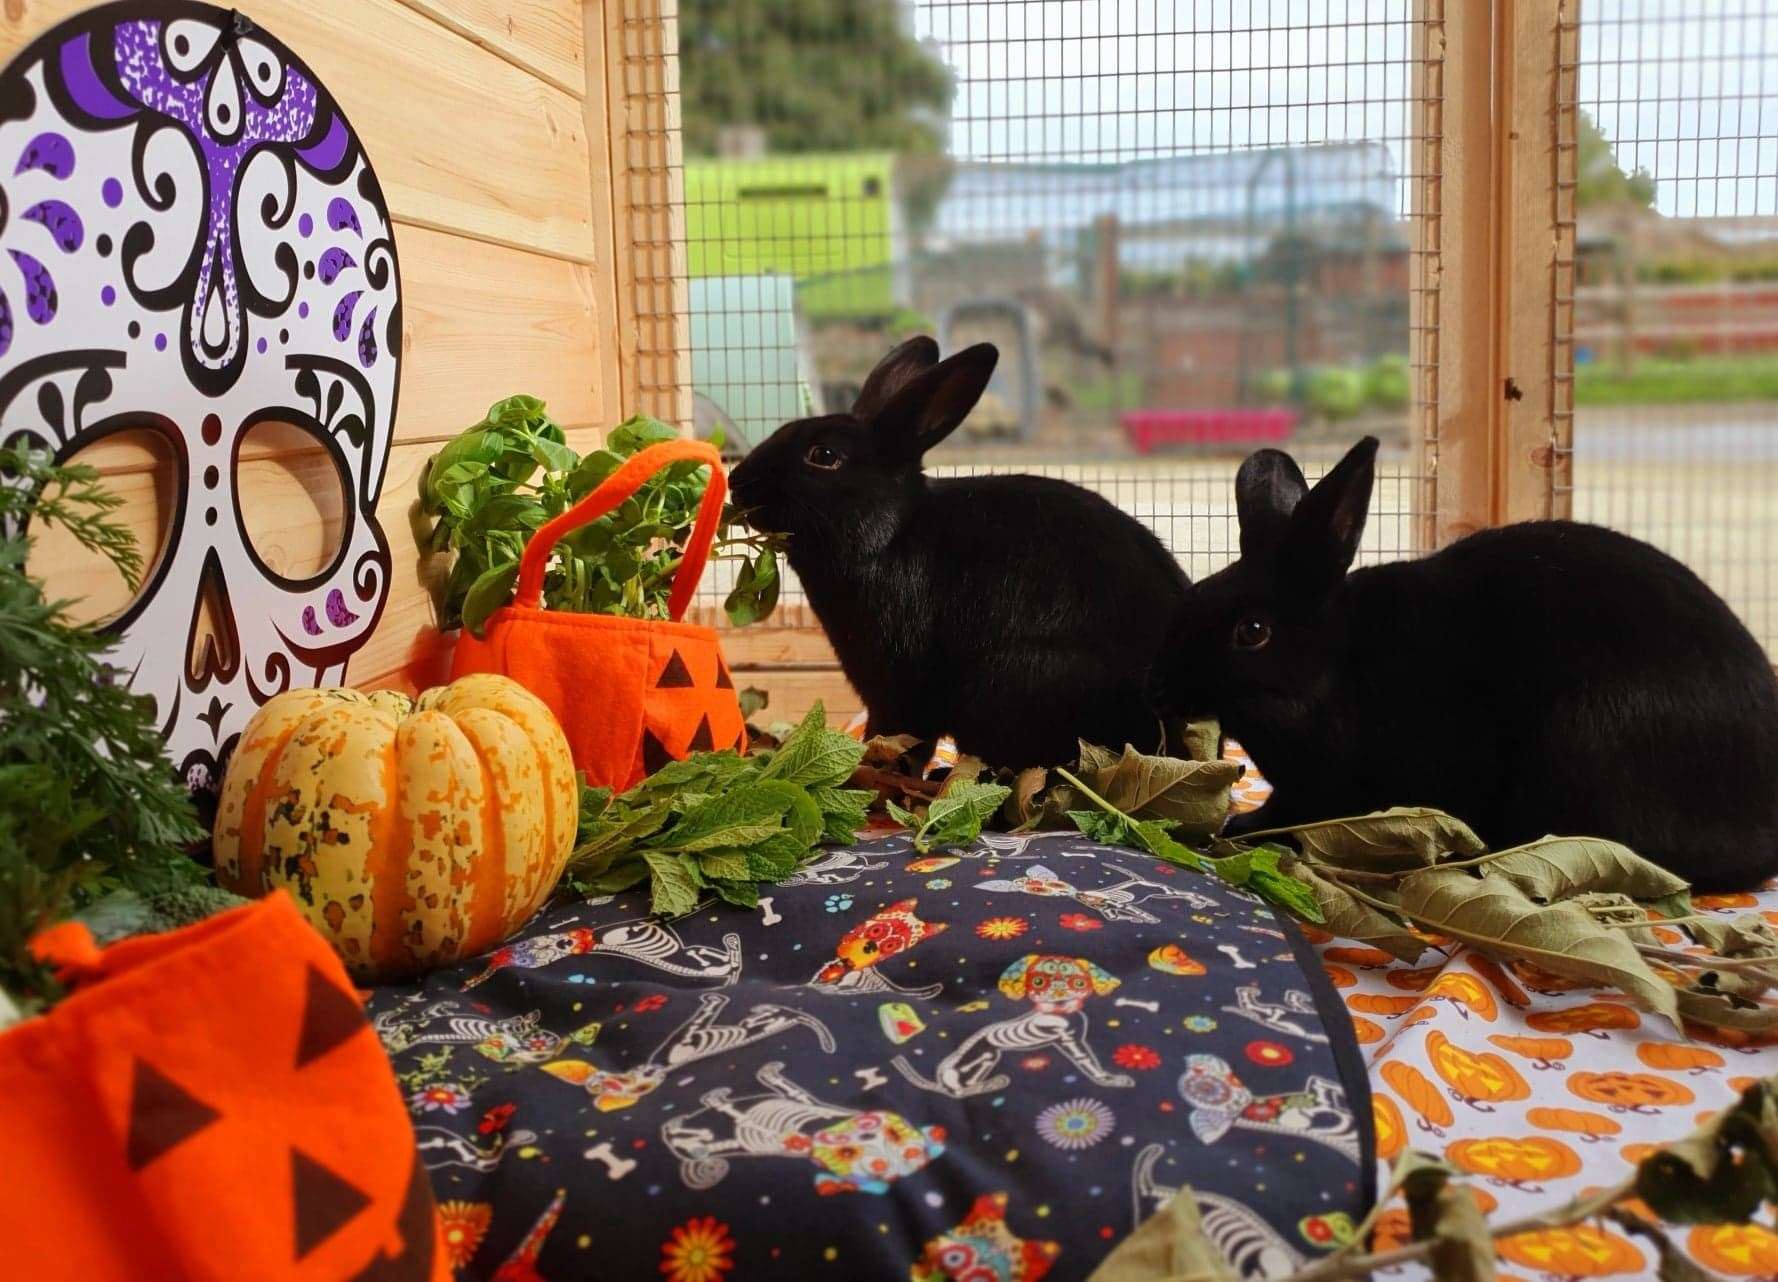 Rescue rabbits Sarah and Hector taking part in a Halloween photoshoot